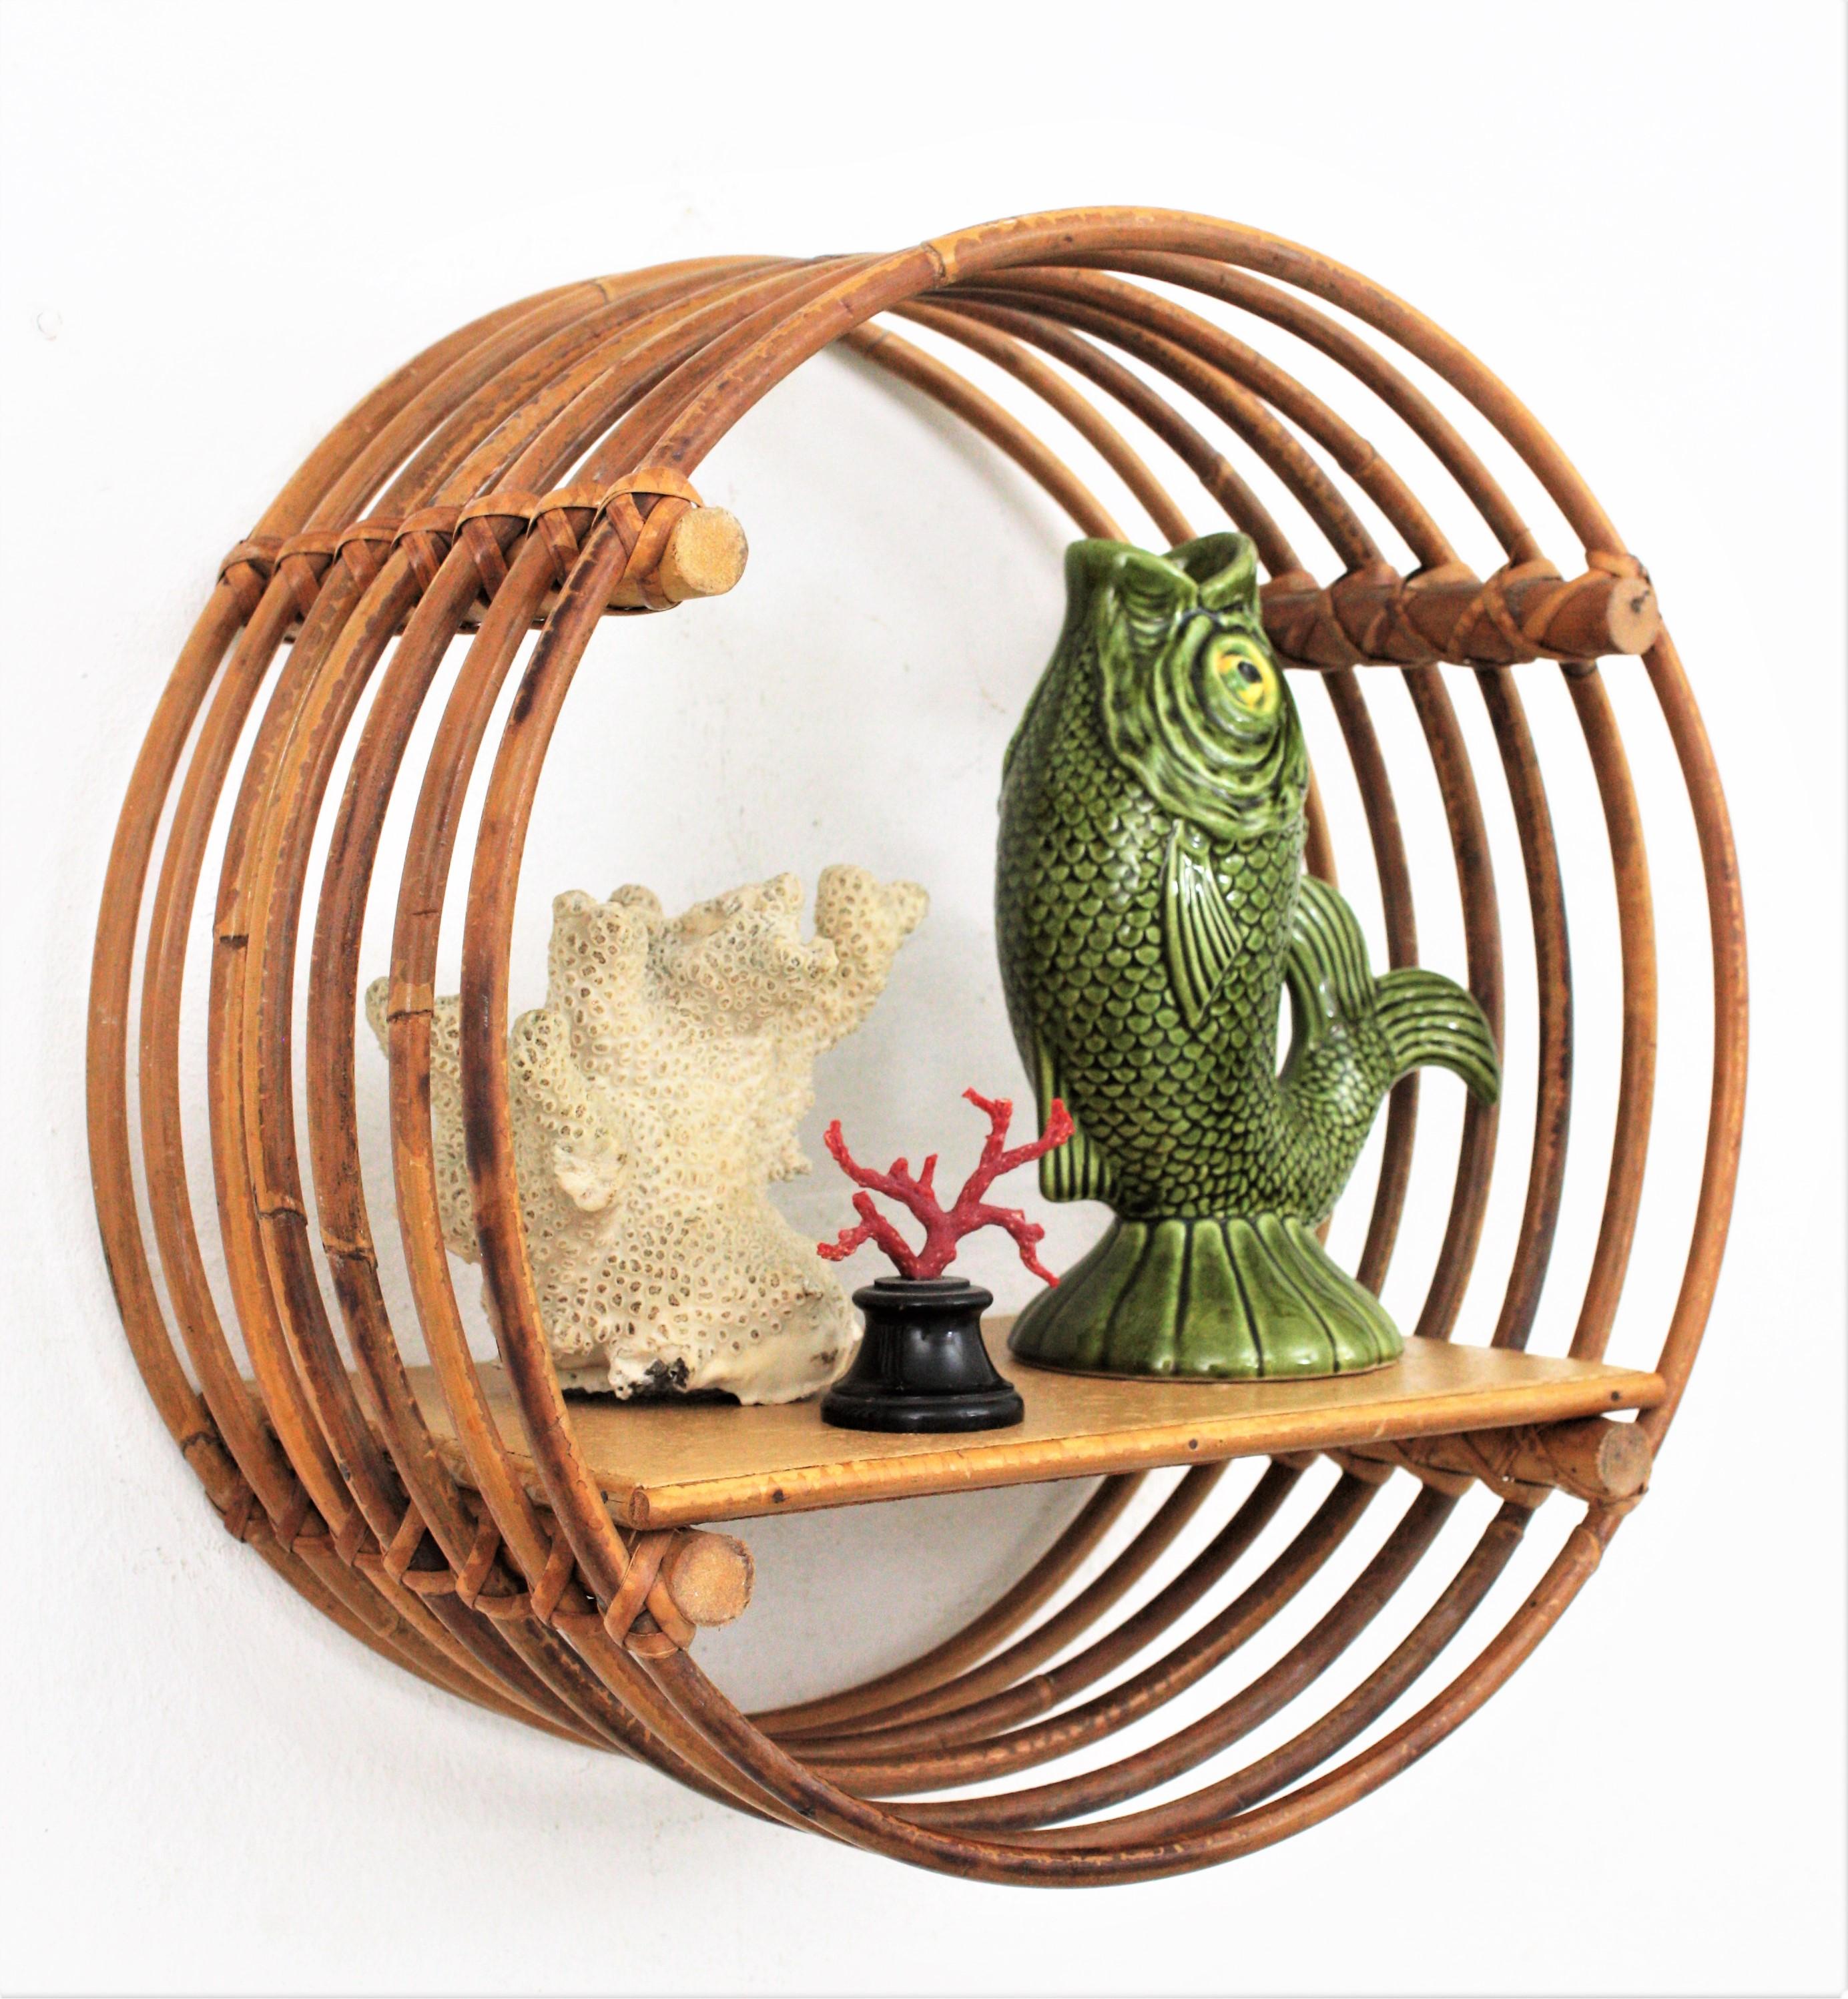 Handcrafted rattan and wood round wall shelf. Spain, 1950-1960.
This unusual shelf features 7 circular separate rattan strands crossed by 4 wooden sticks to hold the shelf surface.
A good choice in a beach or countryside house